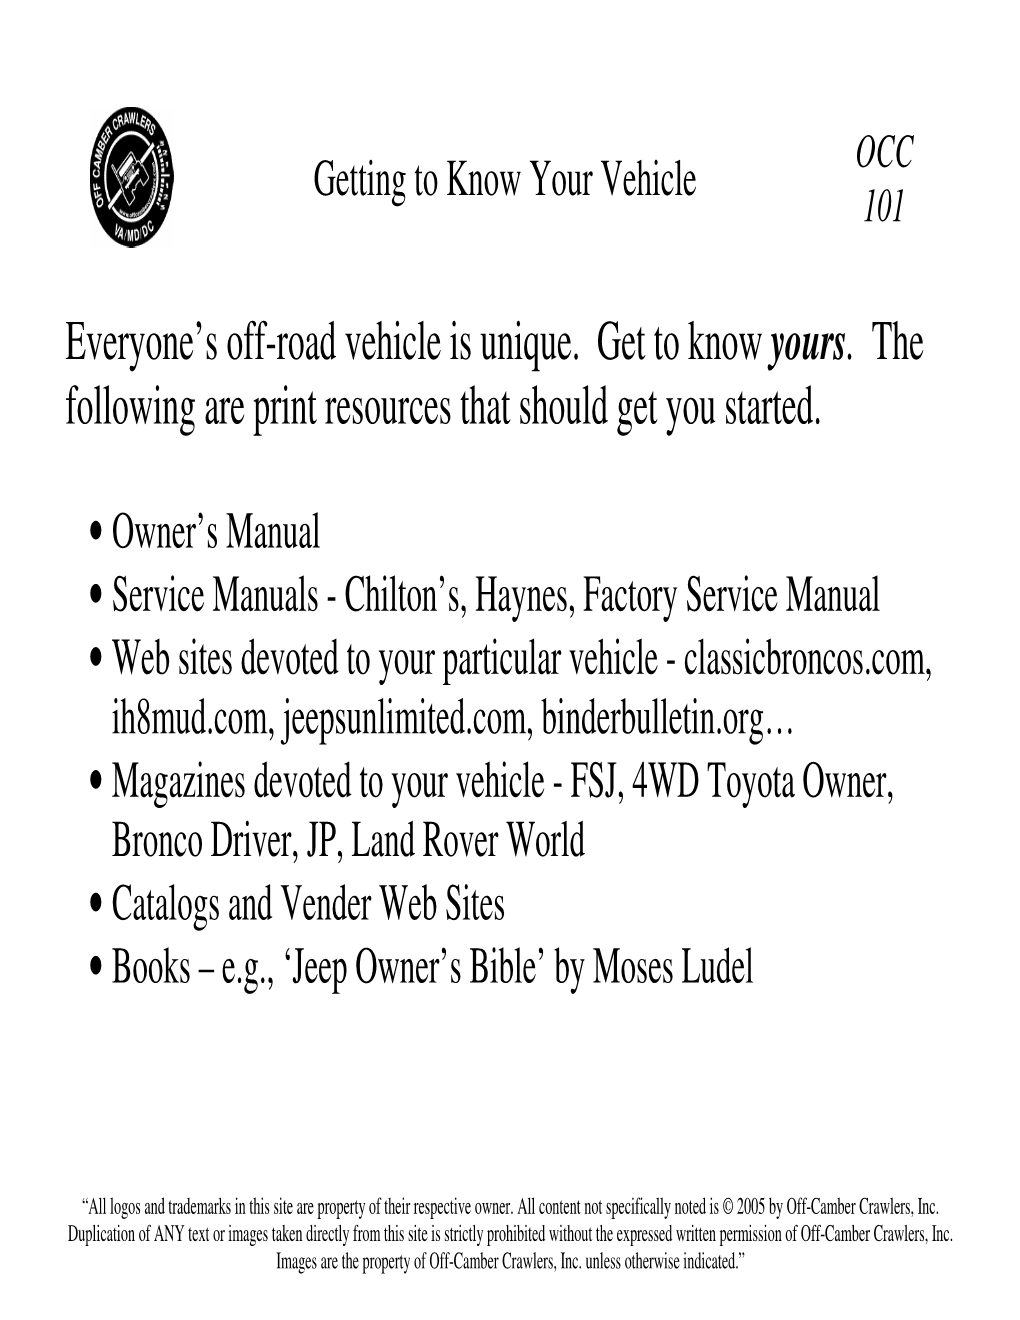 Getting to Know Your Vehicle 101